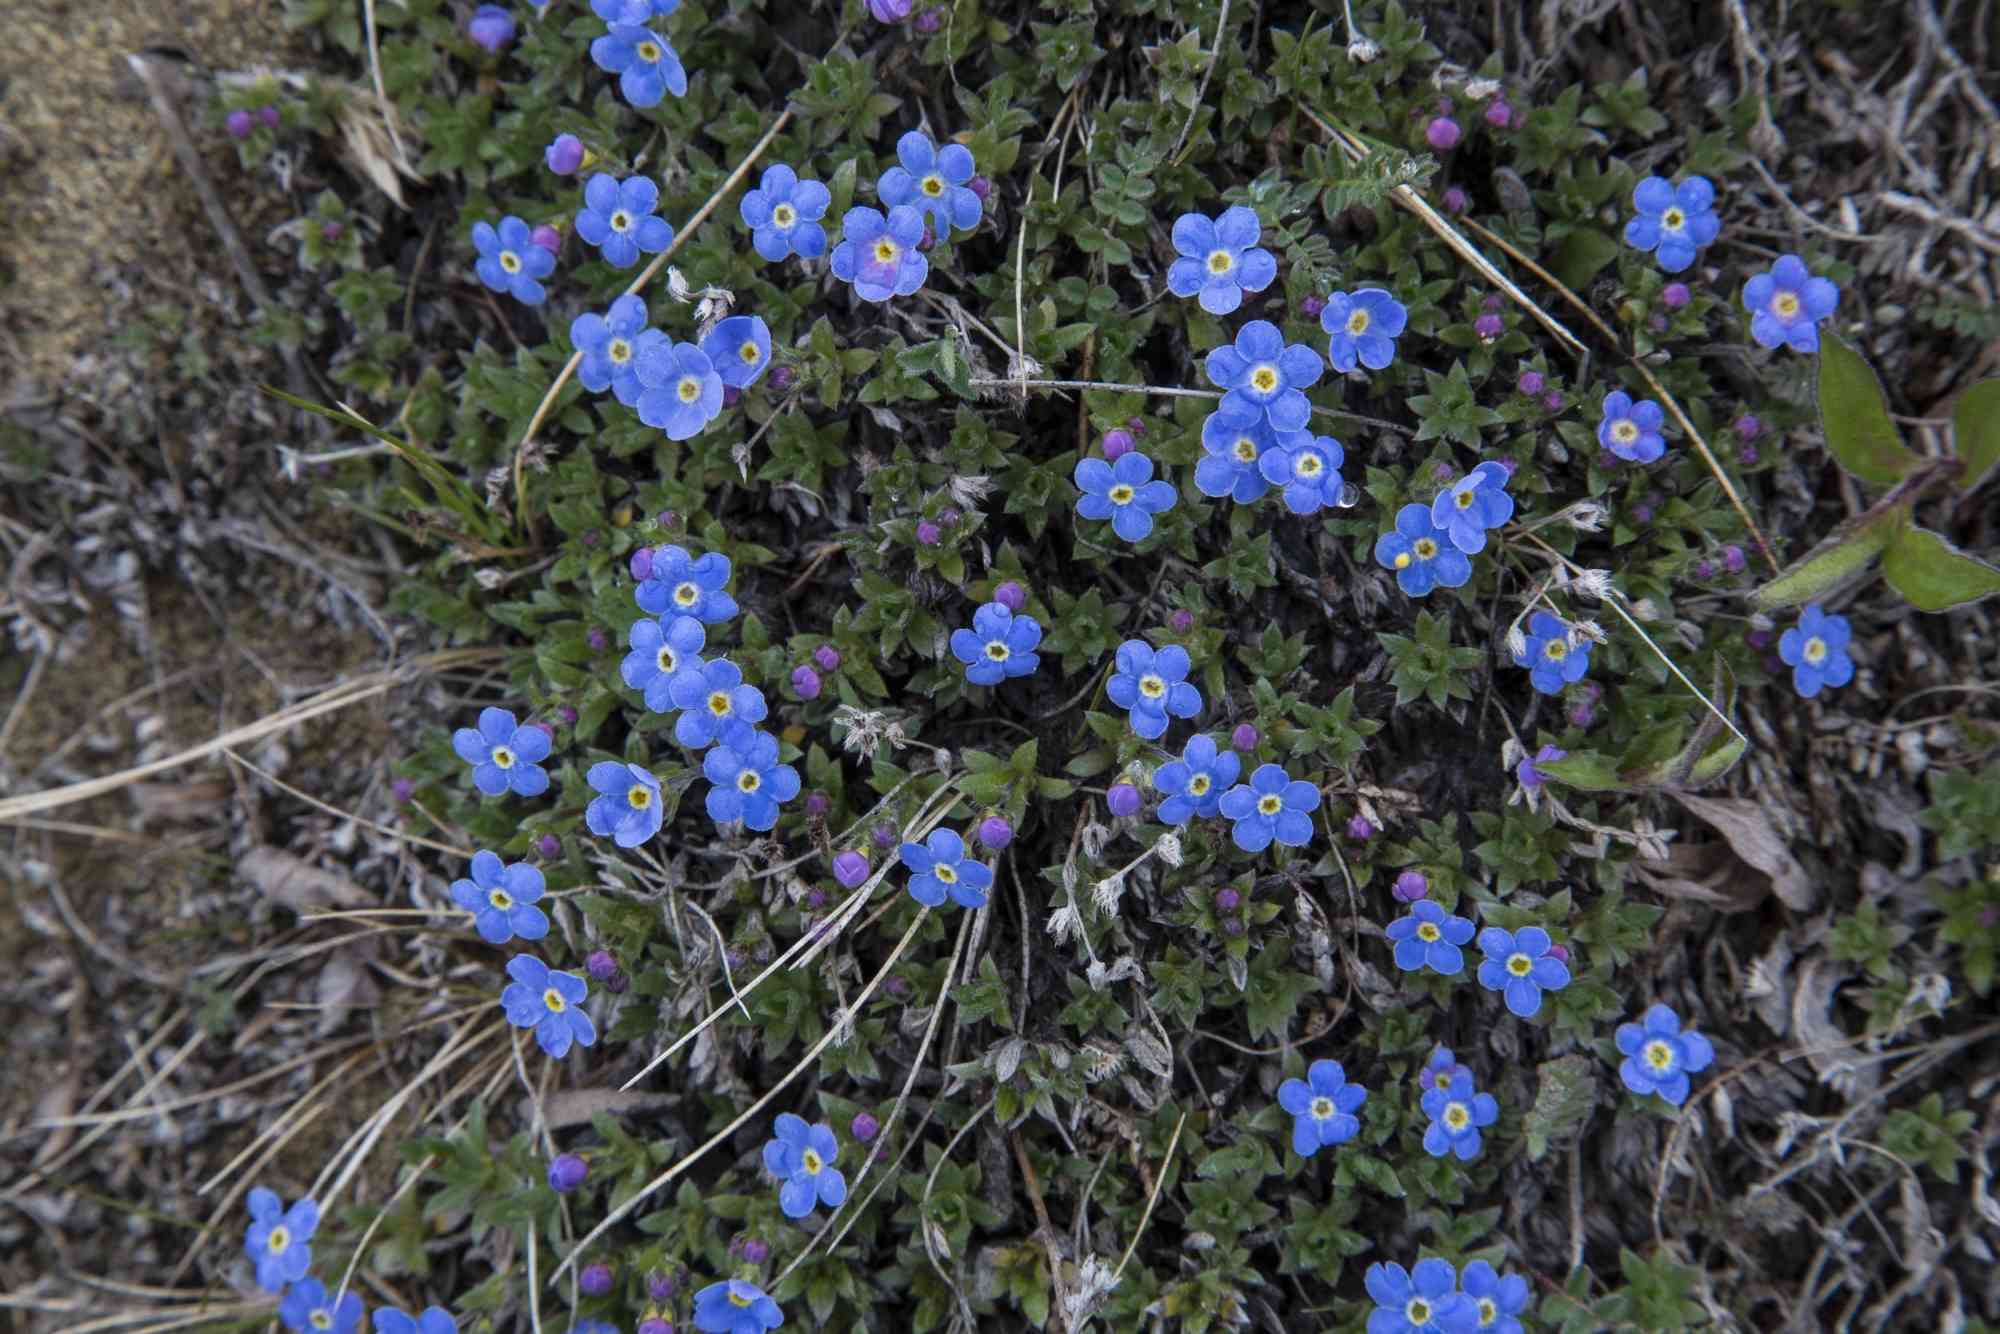 Flowers of the tundra